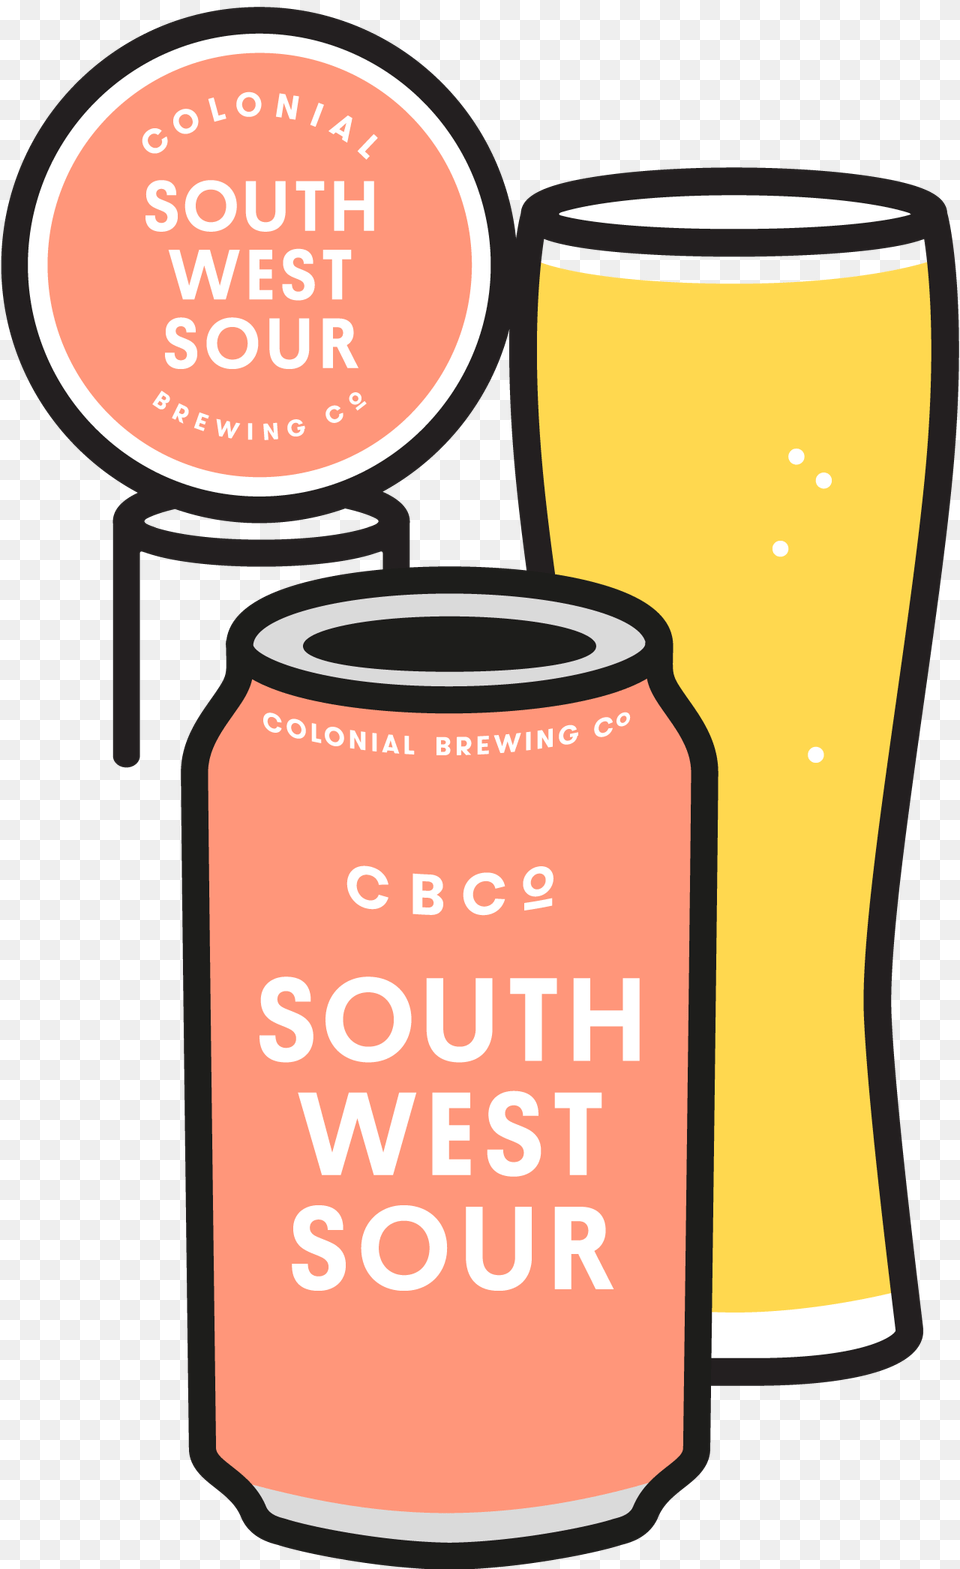 South West Sour Colonial Brewing Co, Alcohol, Beer, Beverage, Glass Png Image